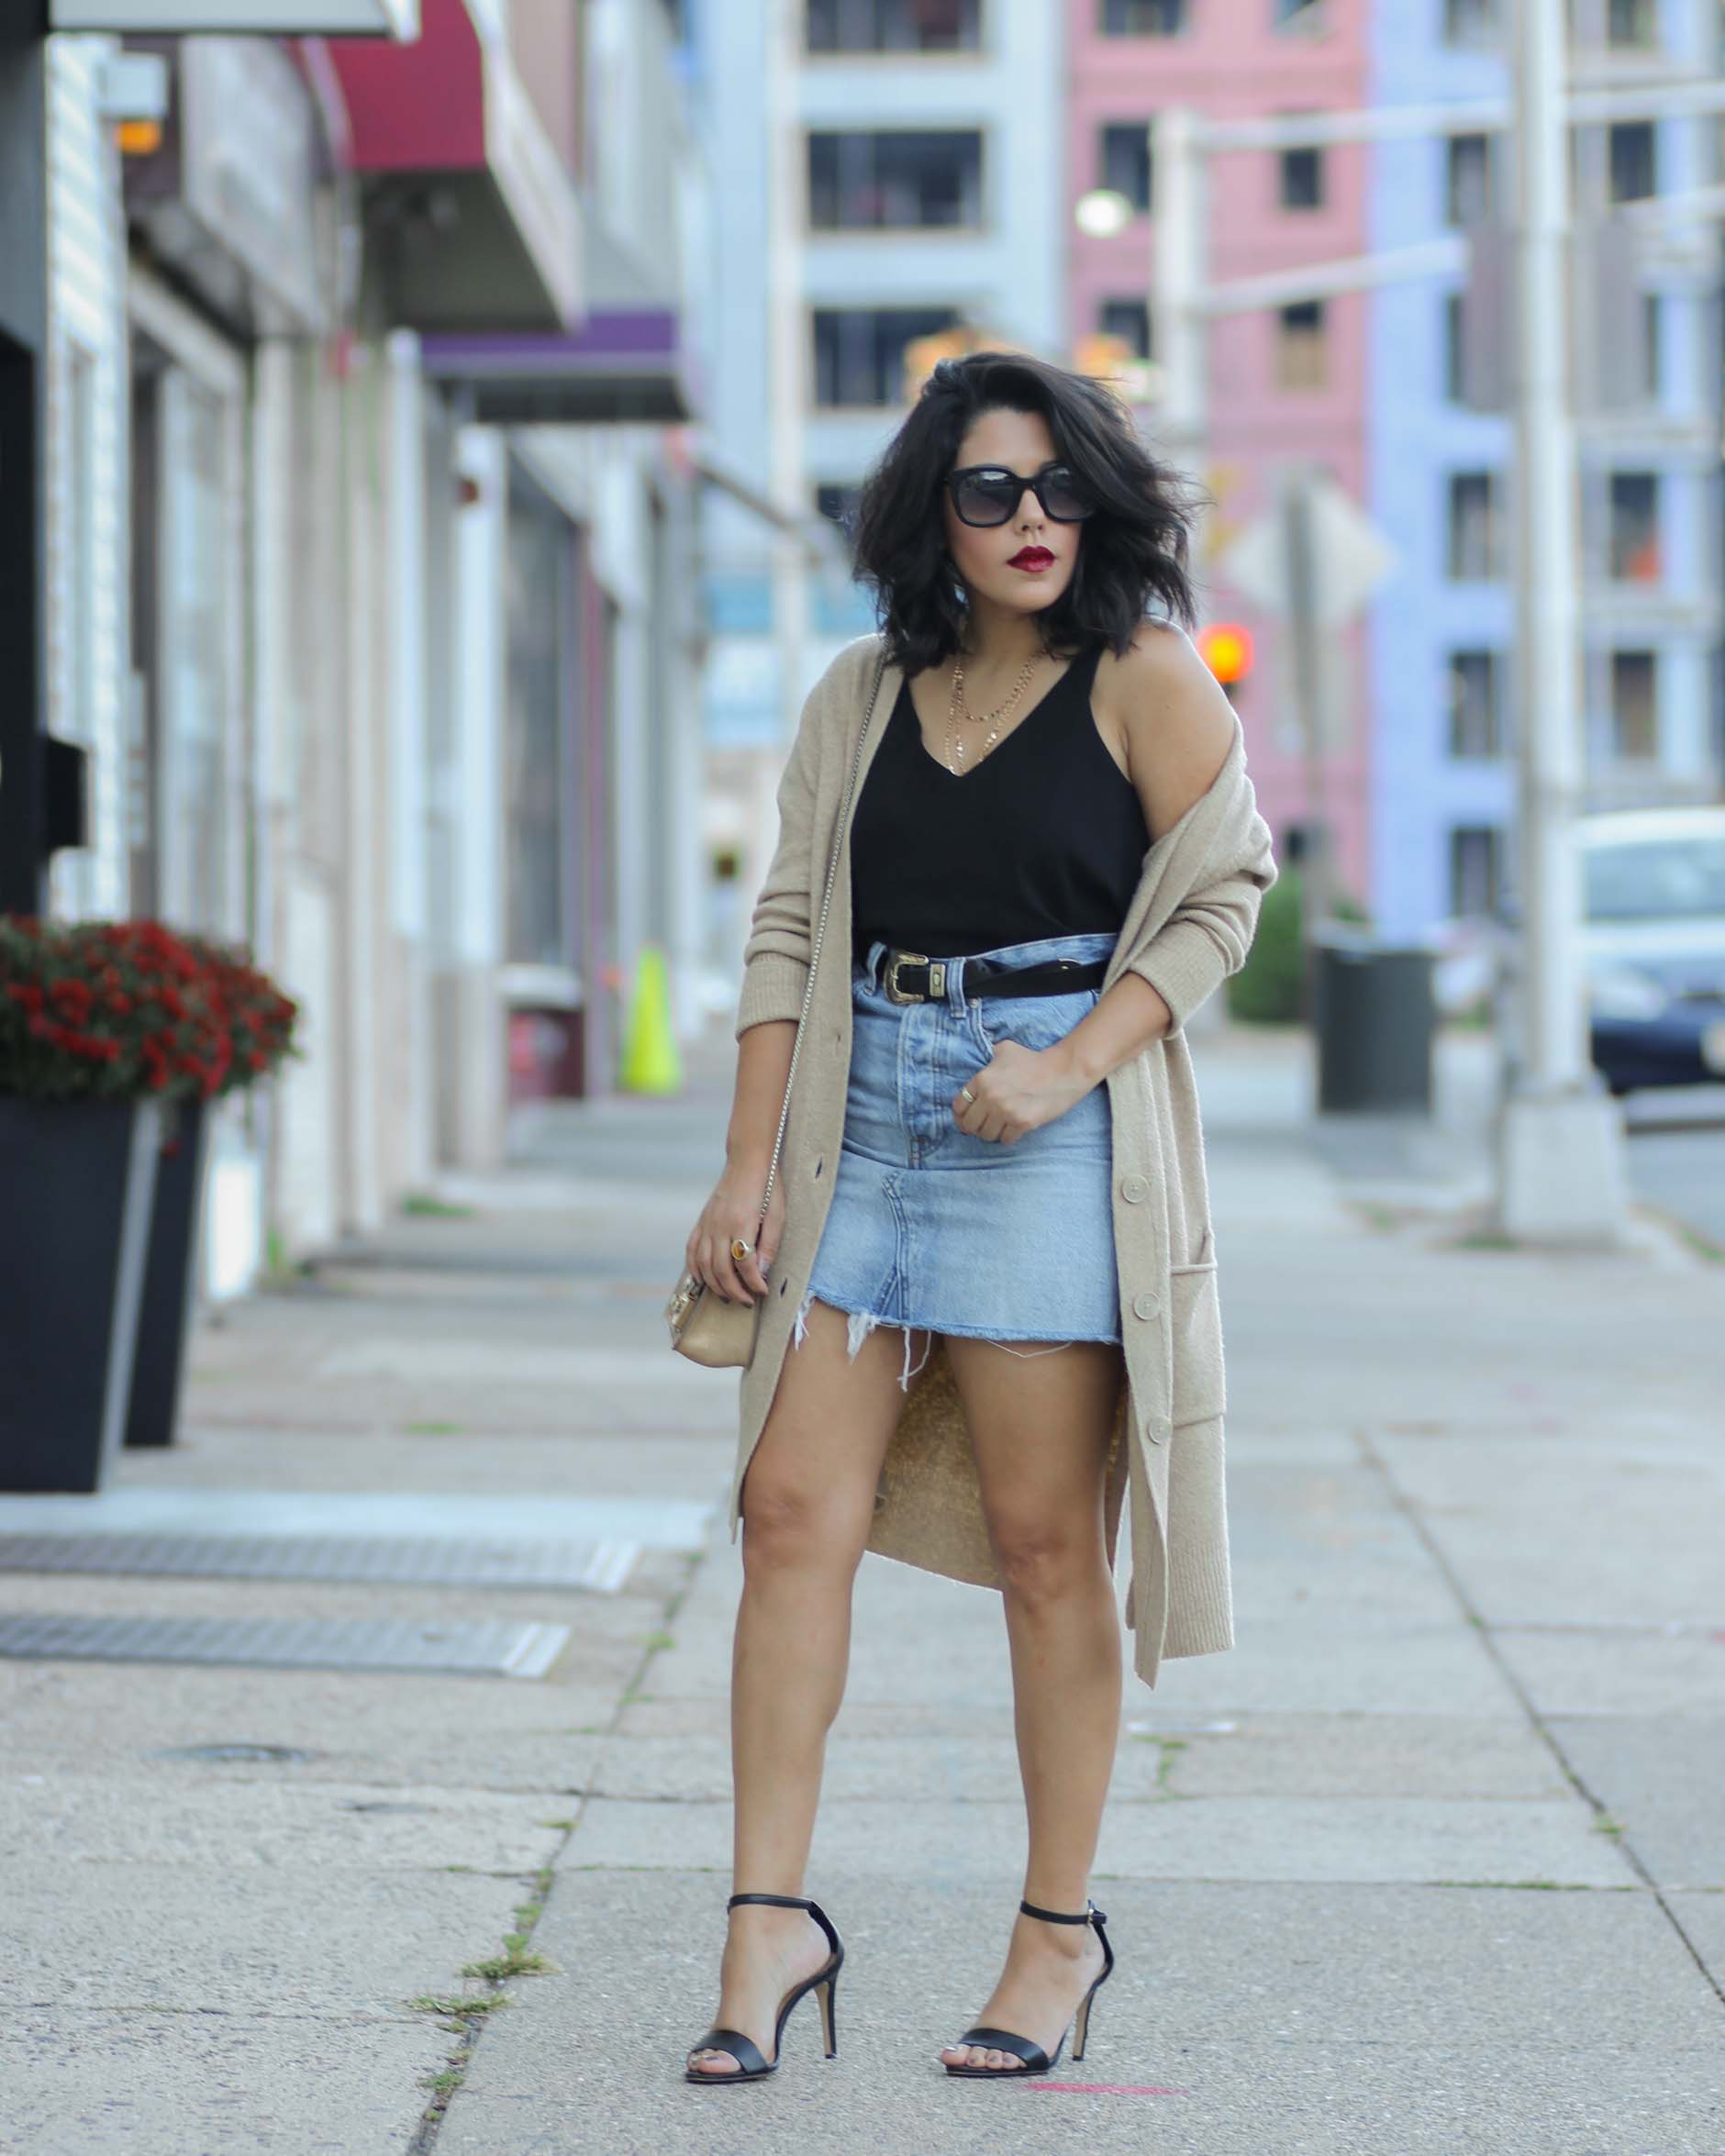 syle blogger naty michele wearing a denim skirt with oversized cardigan